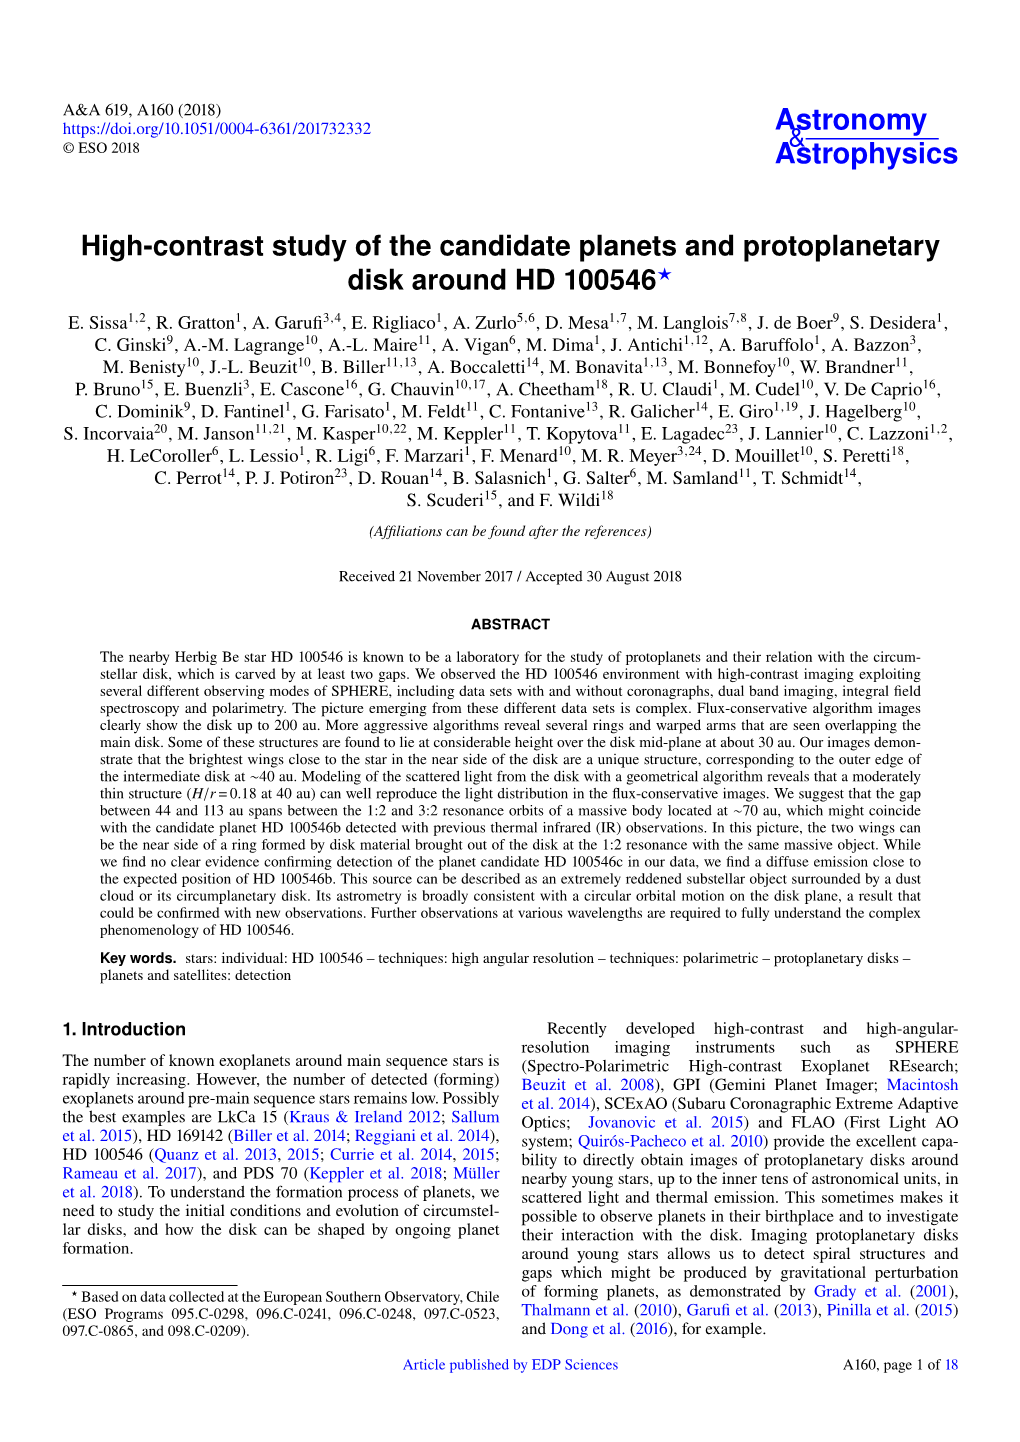 High-Contrast Study of the Candidate Planets and Protoplanetary Disk Around HD 100546? E